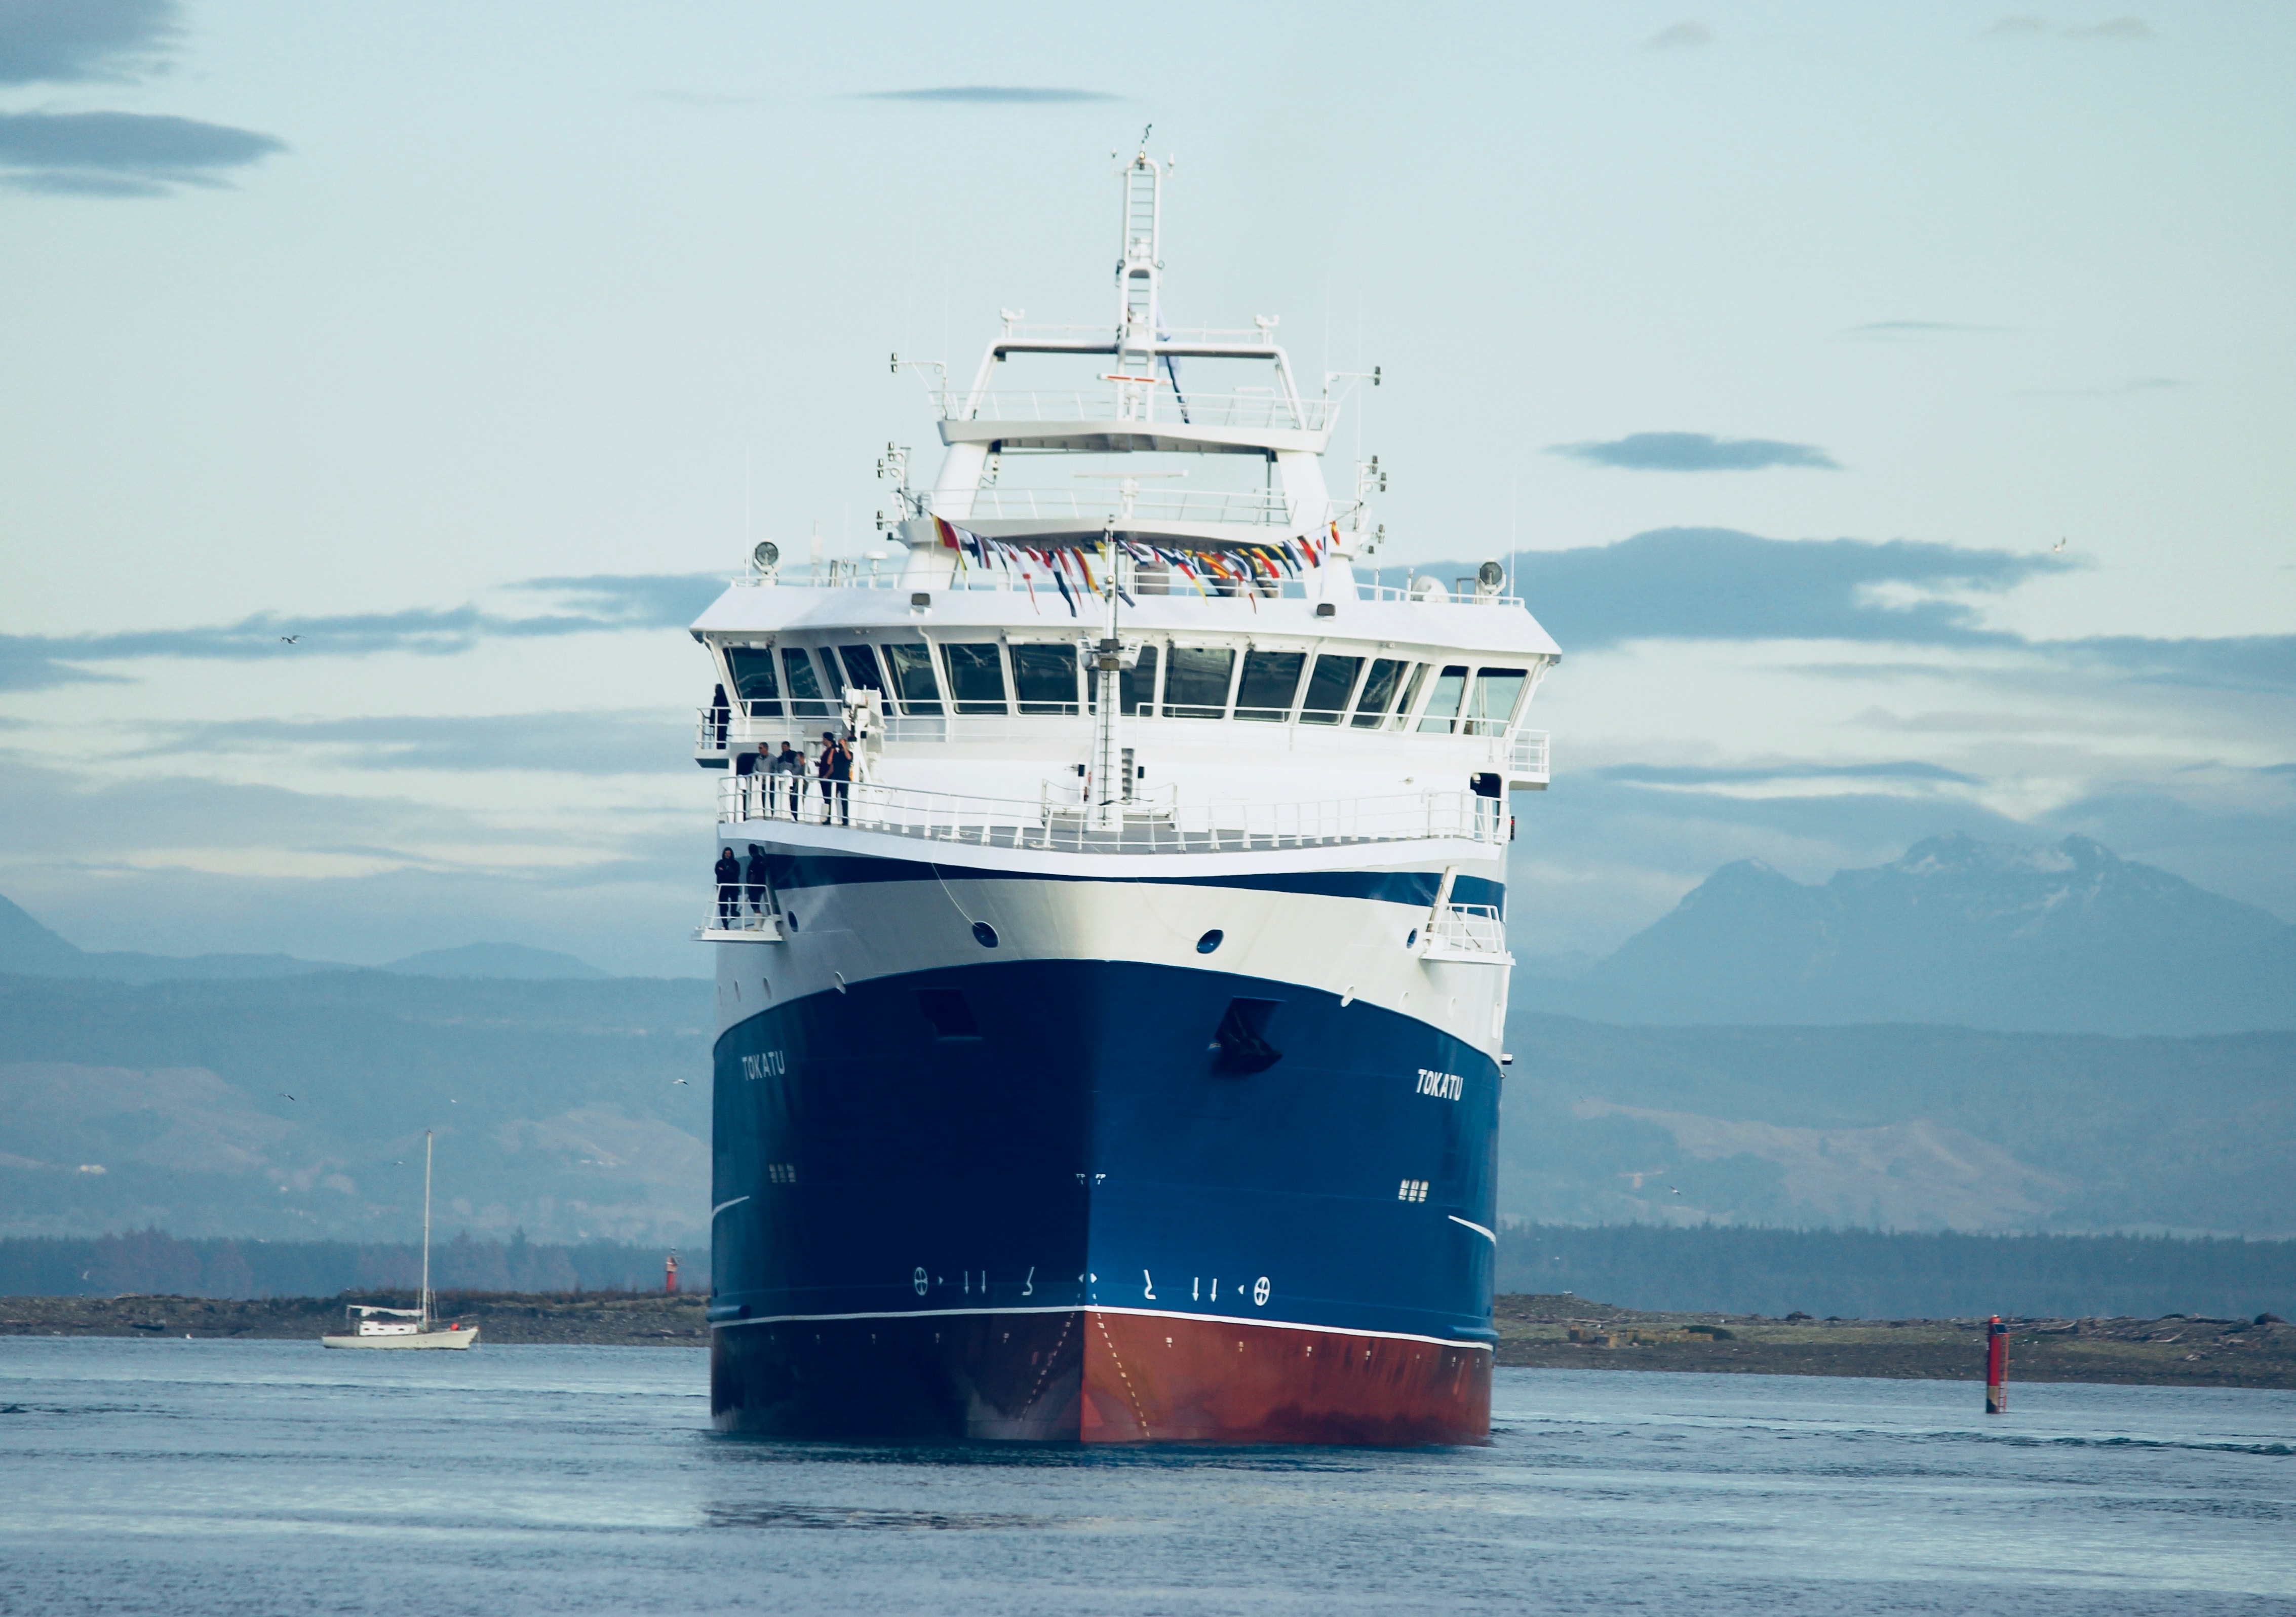 make ships quieter for aquatic noise pollution